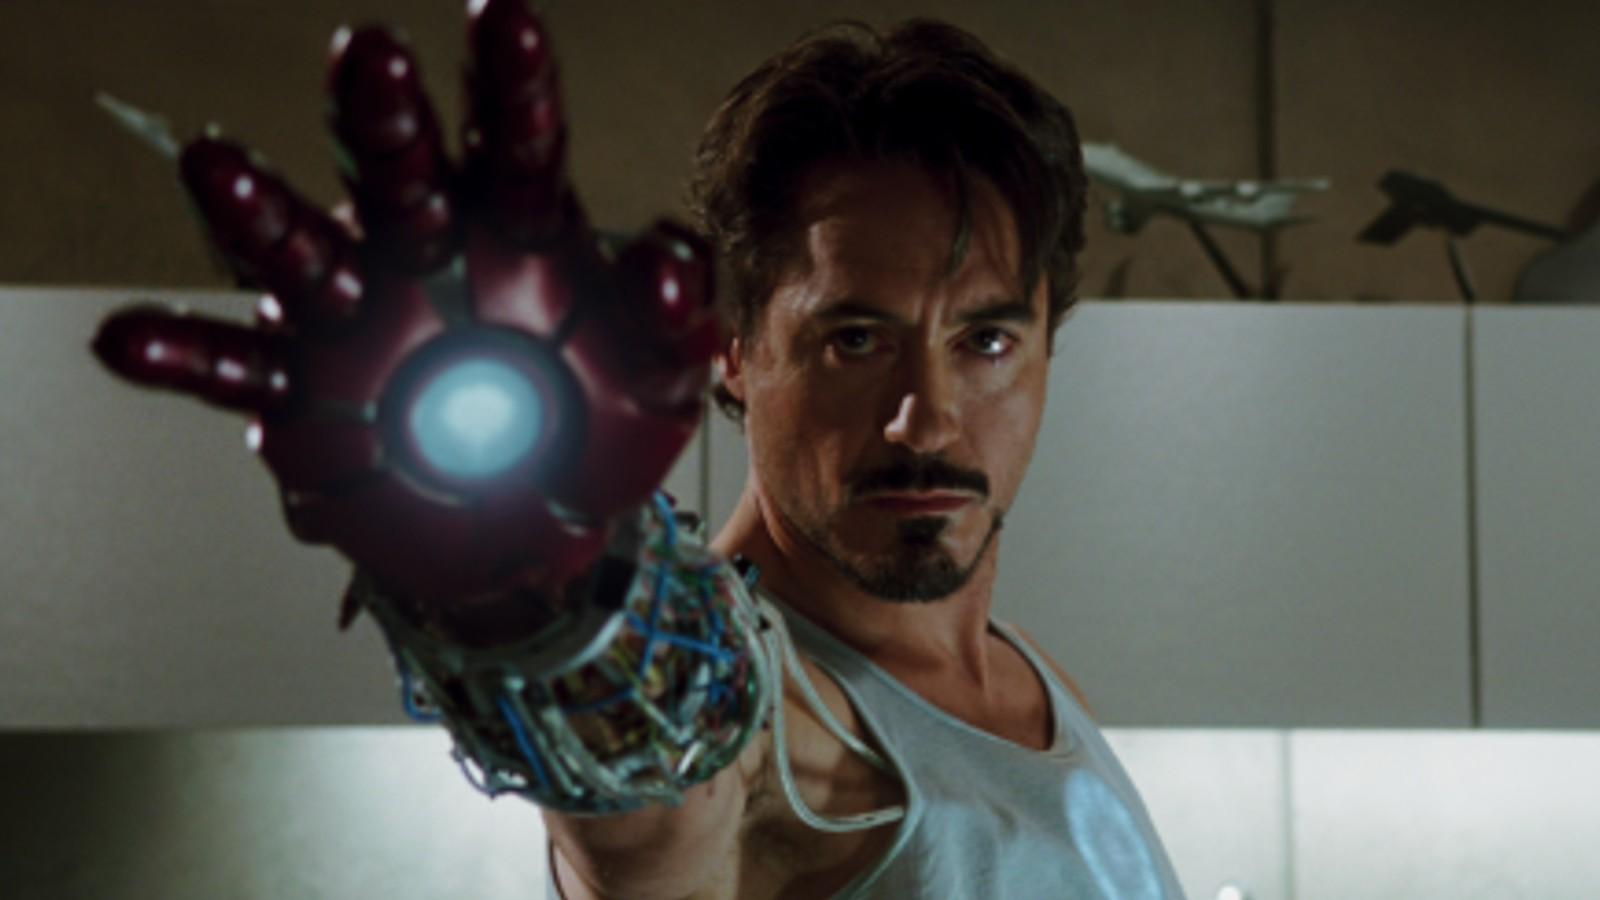 A close up of Tony Stark holding up one of his suit gauntlets in Iron Man